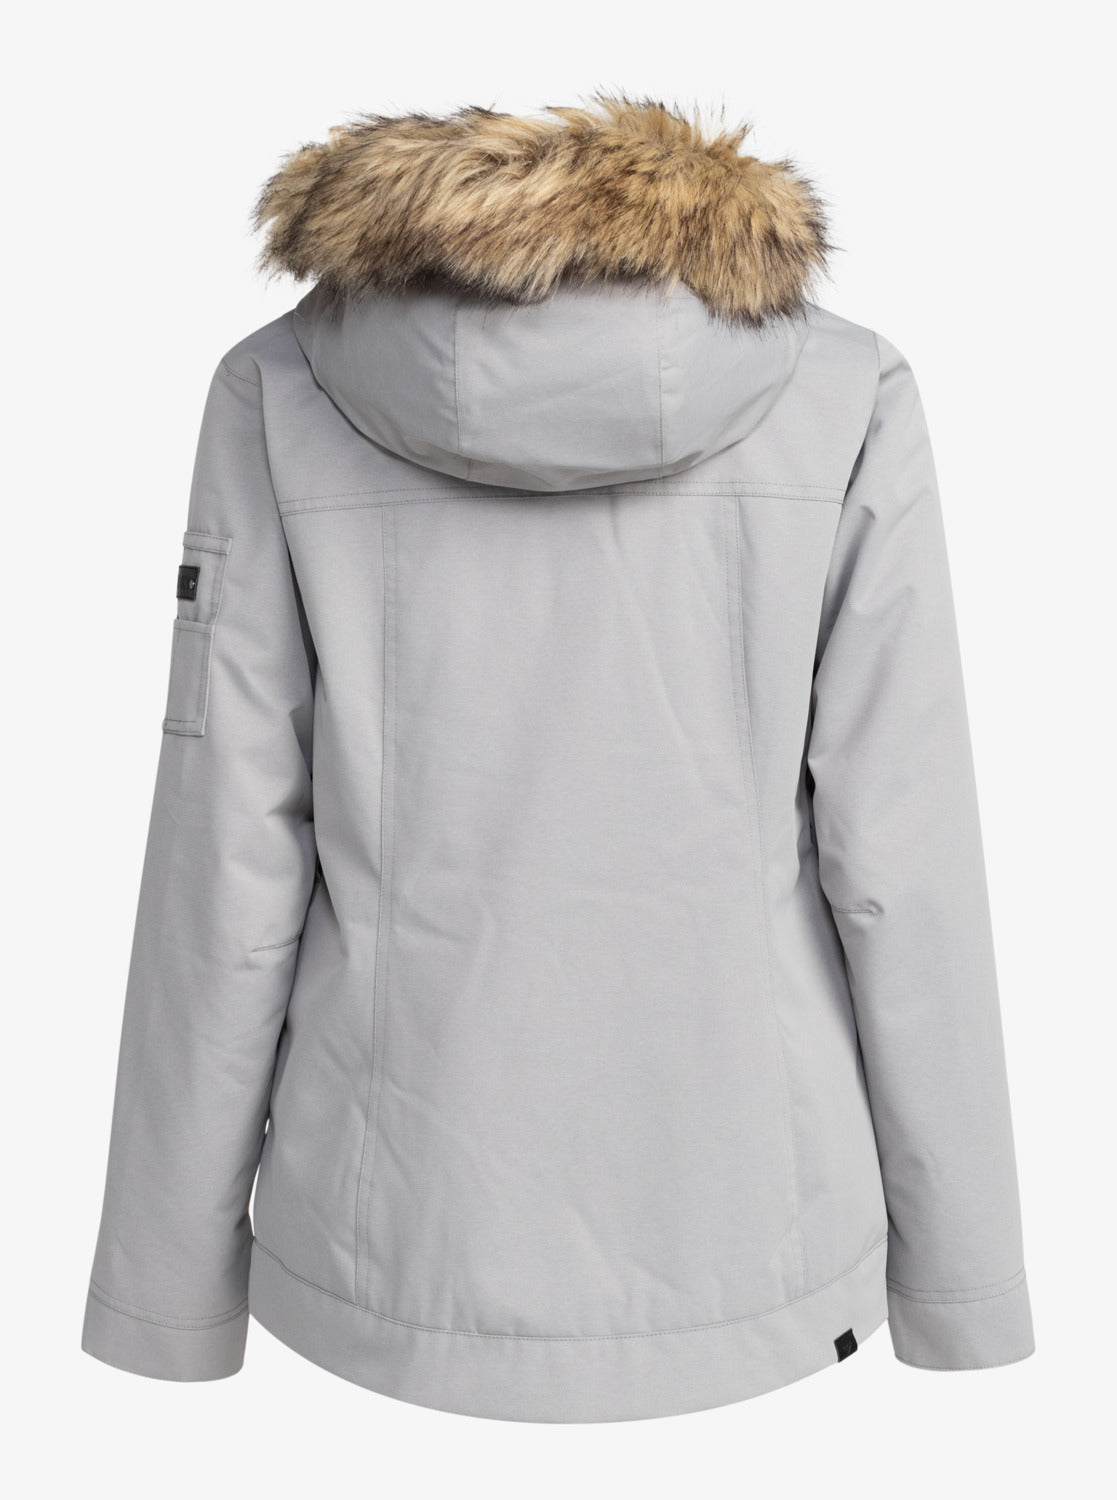 Womens Meade Technical Snow Jacket